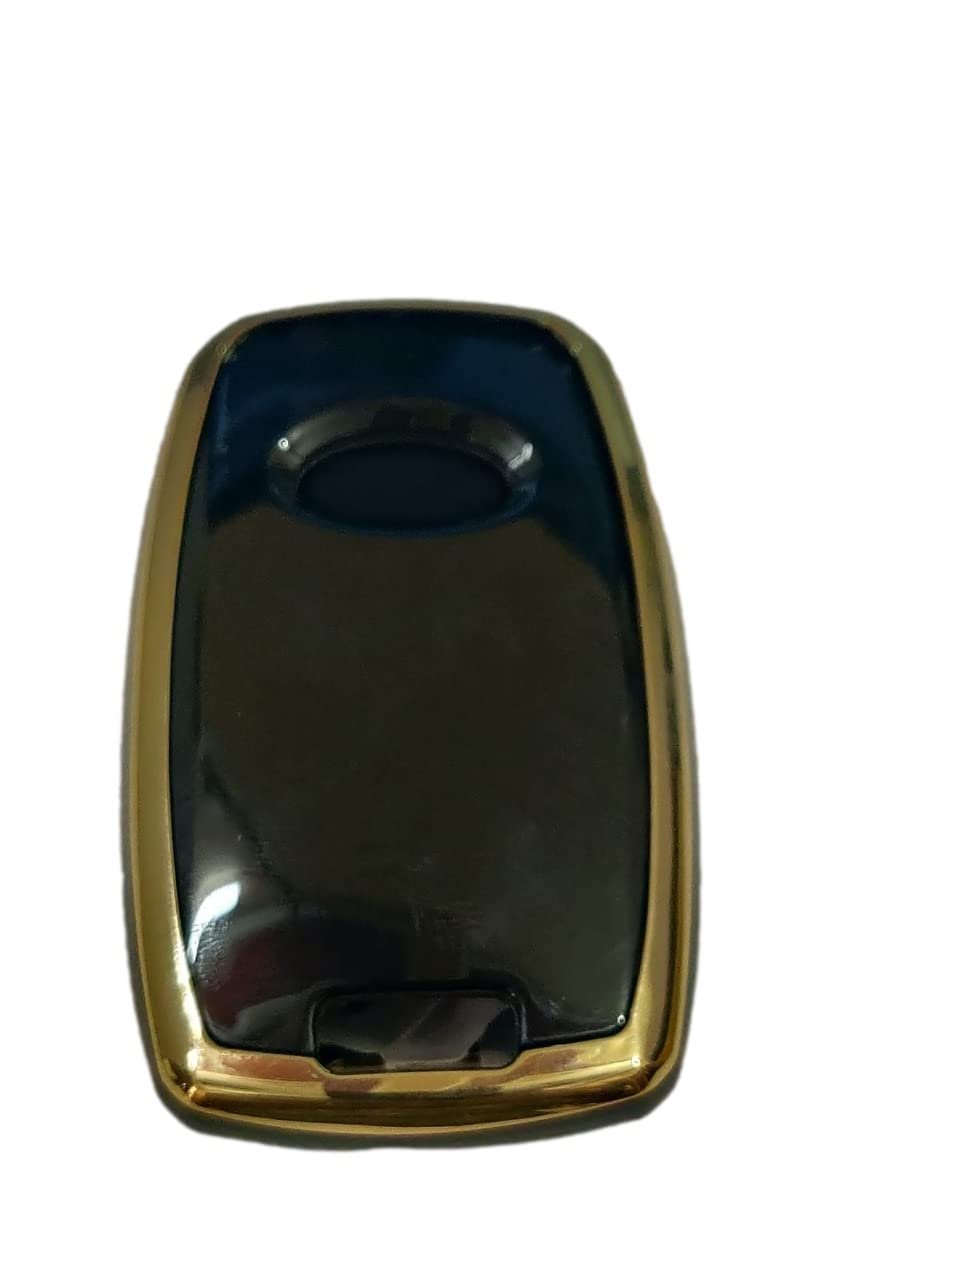 TPU Silicone Key Cover Compatible with Kia Carnival 5 Button Smart Key(Gold/Black) Image 